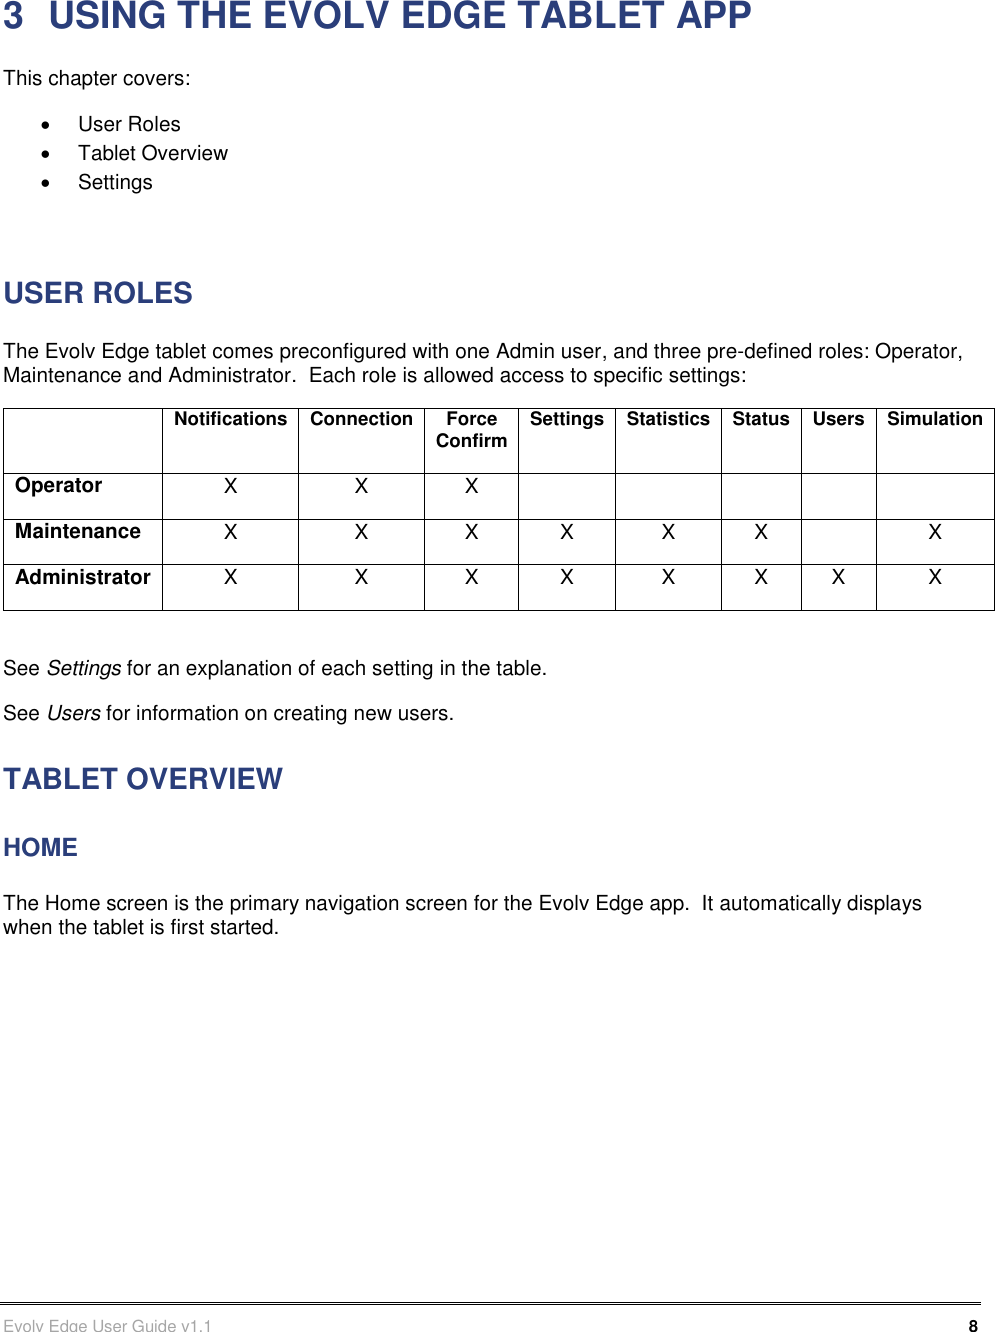      Evolv Edge User Guide v1.1    8 Part Number: 500-00003 3  USING THE EVOLV EDGE TABLET APP This chapter covers:   User Roles   Tablet Overview   Settings  USER ROLES The Evolv Edge tablet comes preconfigured with one Admin user, and three pre-defined roles: Operator, Maintenance and Administrator.  Each role is allowed access to specific settings:  Notifications Connection Force Confirm Settings Statistics Status Users Simulation Operator X X X      Maintenance X X X X X X  X Administrator X X X X X X X X  See Settings for an explanation of each setting in the table. See Users for information on creating new users. TABLET OVERVIEW HOME The Home screen is the primary navigation screen for the Evolv Edge app.  It automatically displays when the tablet is first started.             